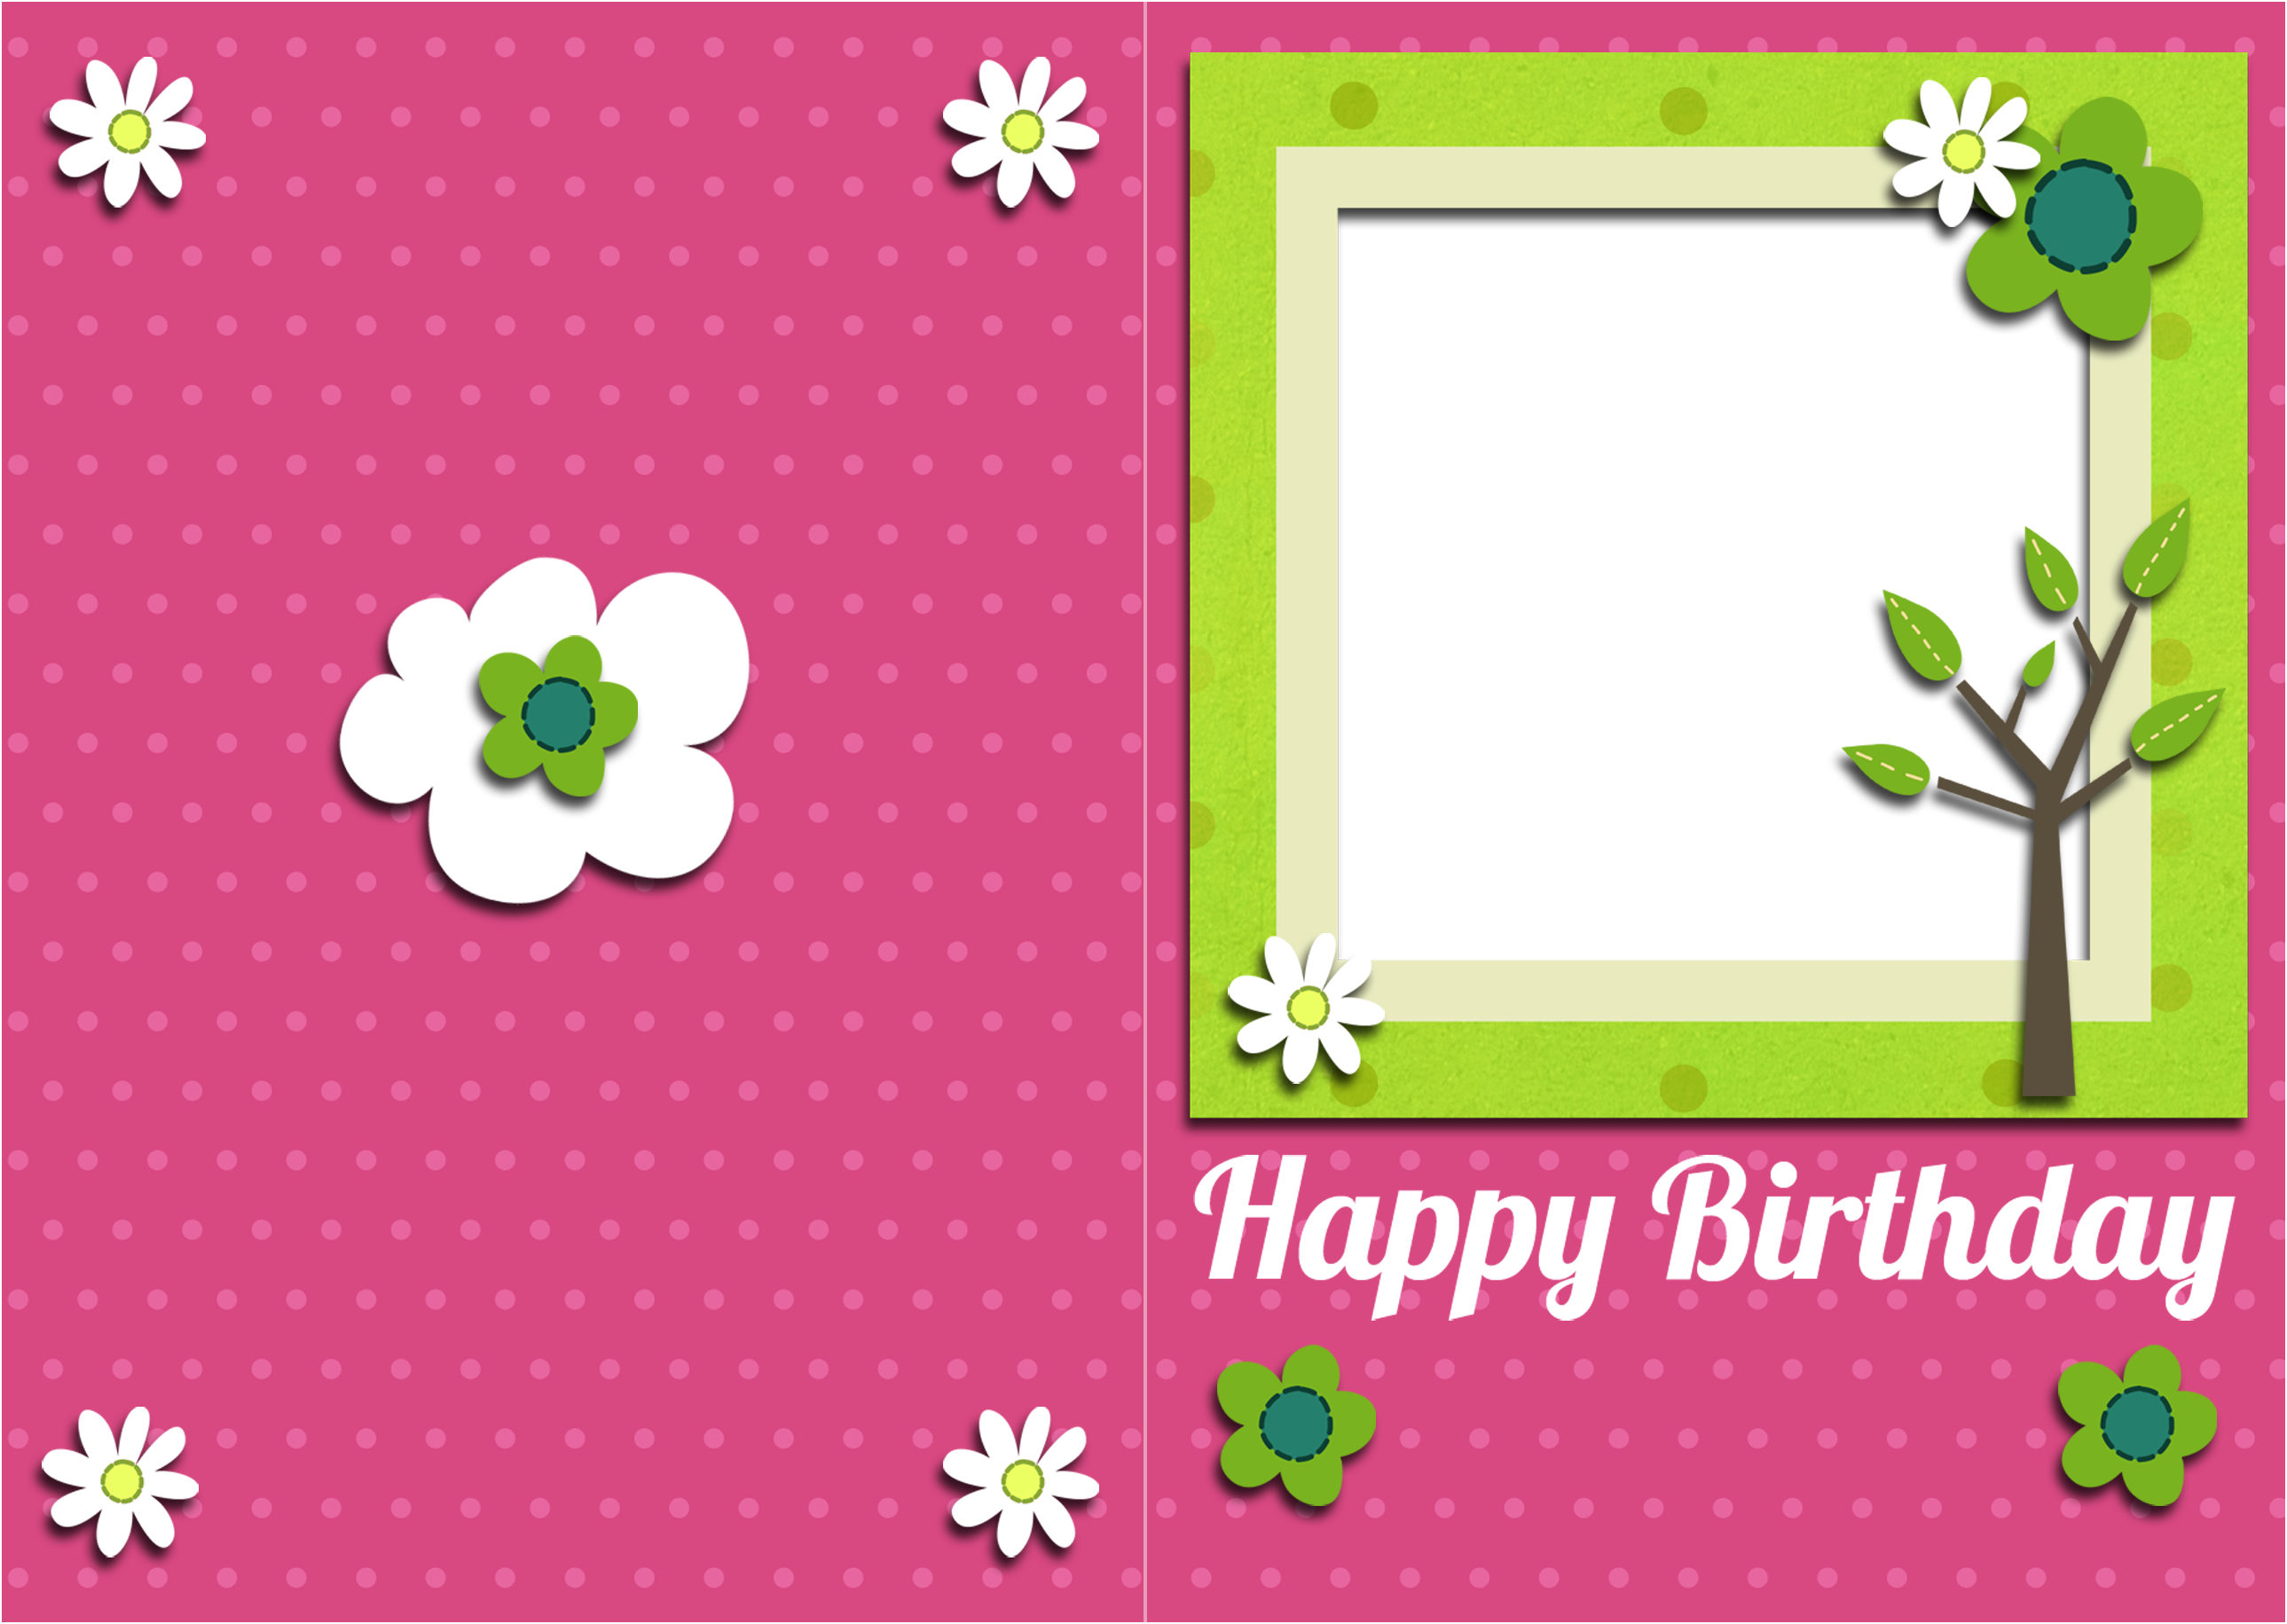 35 Happy Birthday Cards Free To Download - The WoW Style